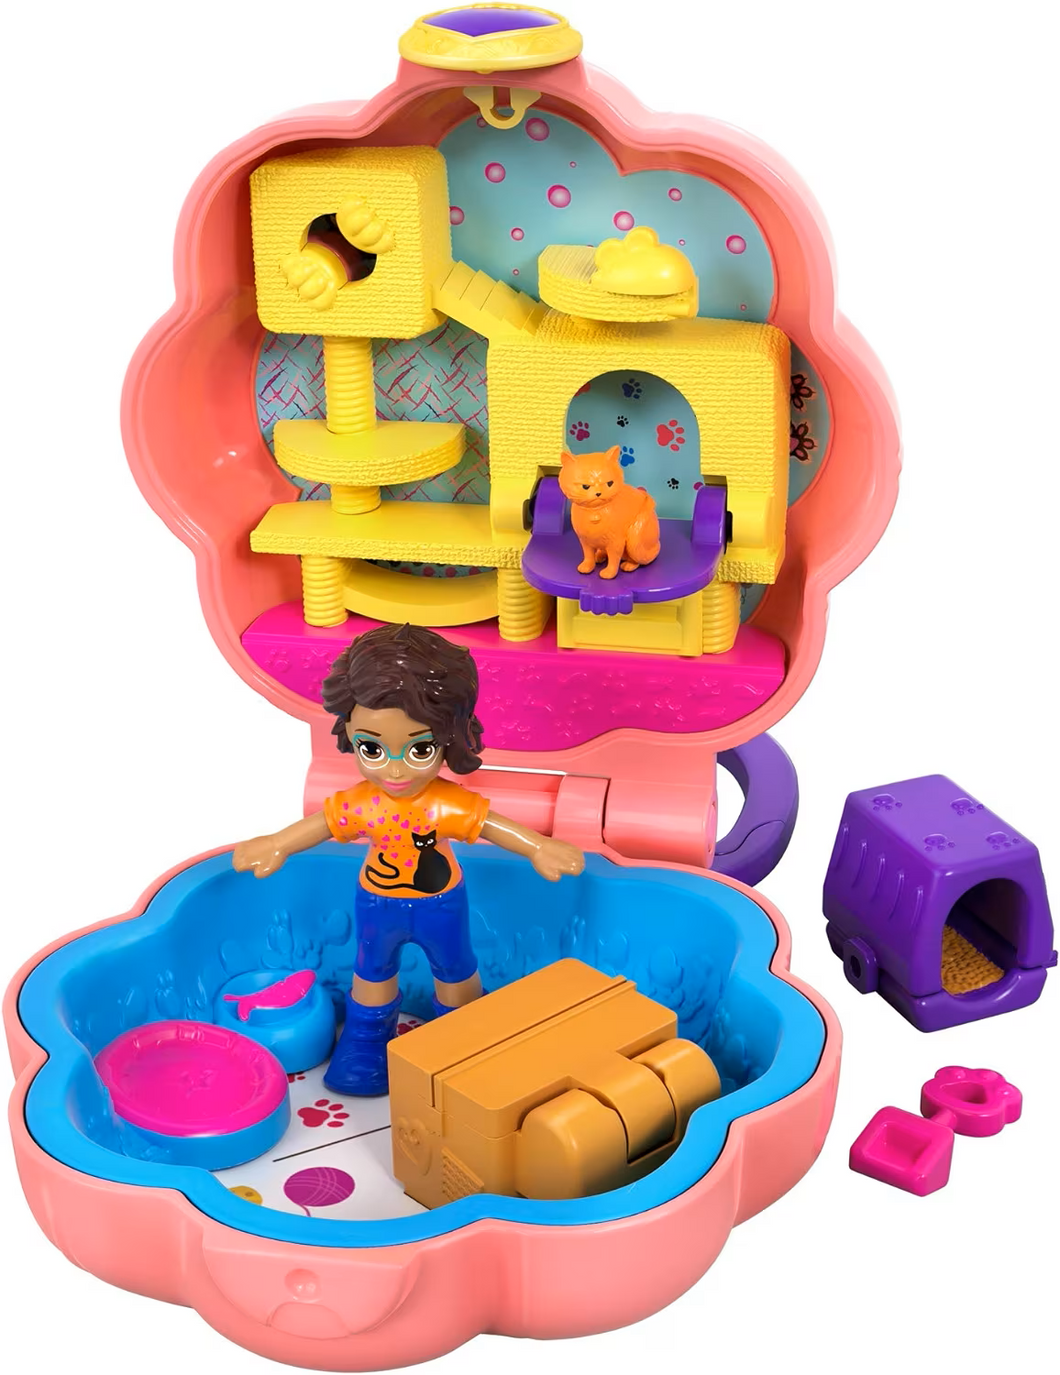 Polly Pocket Purrfect Playhouse Micro Playset